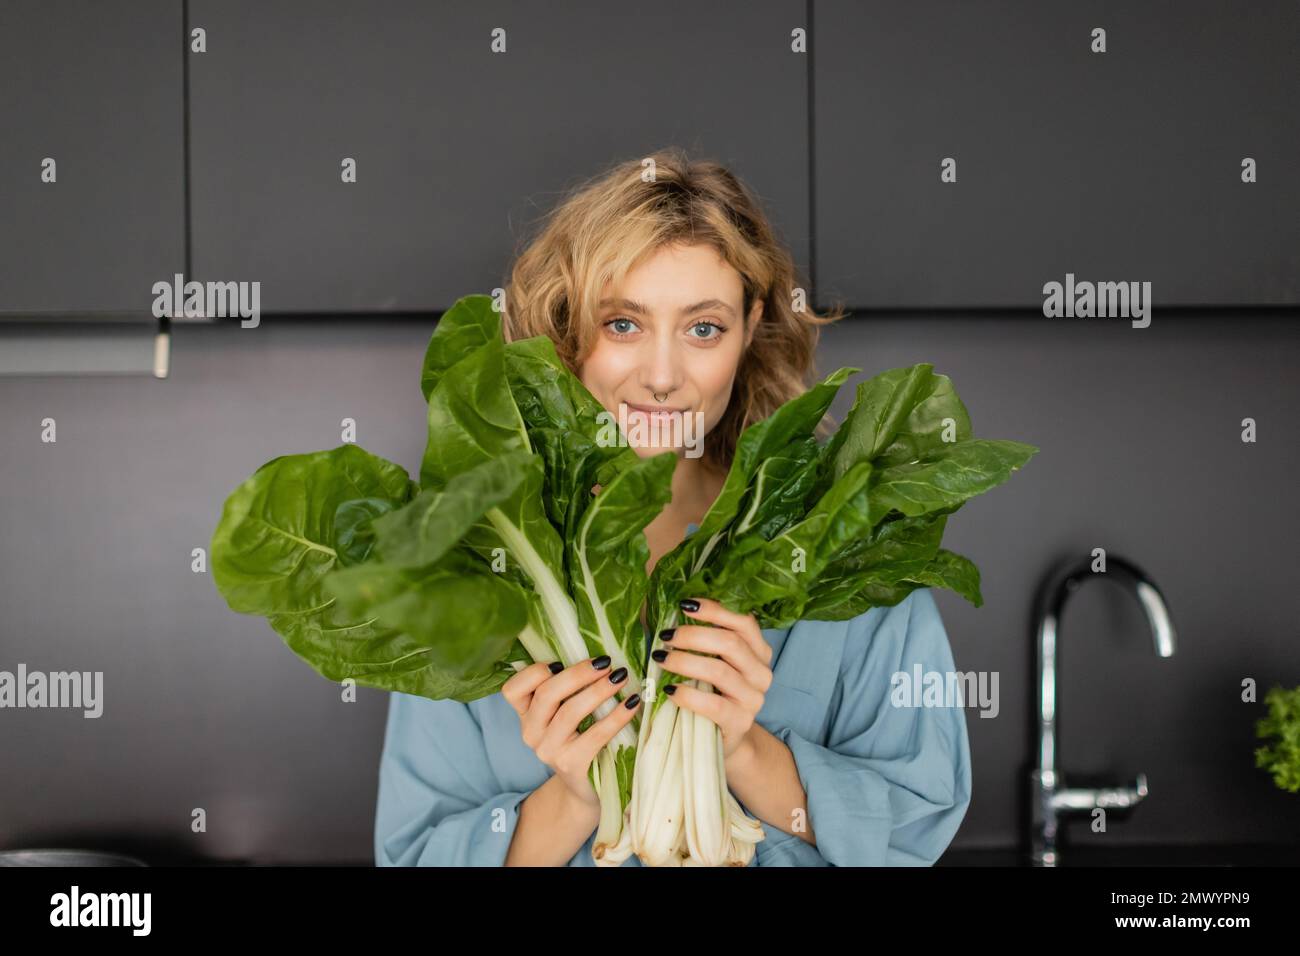 pierced young woman smiling and holding green cabbage leaves in kitchen,stock image Stock Photo